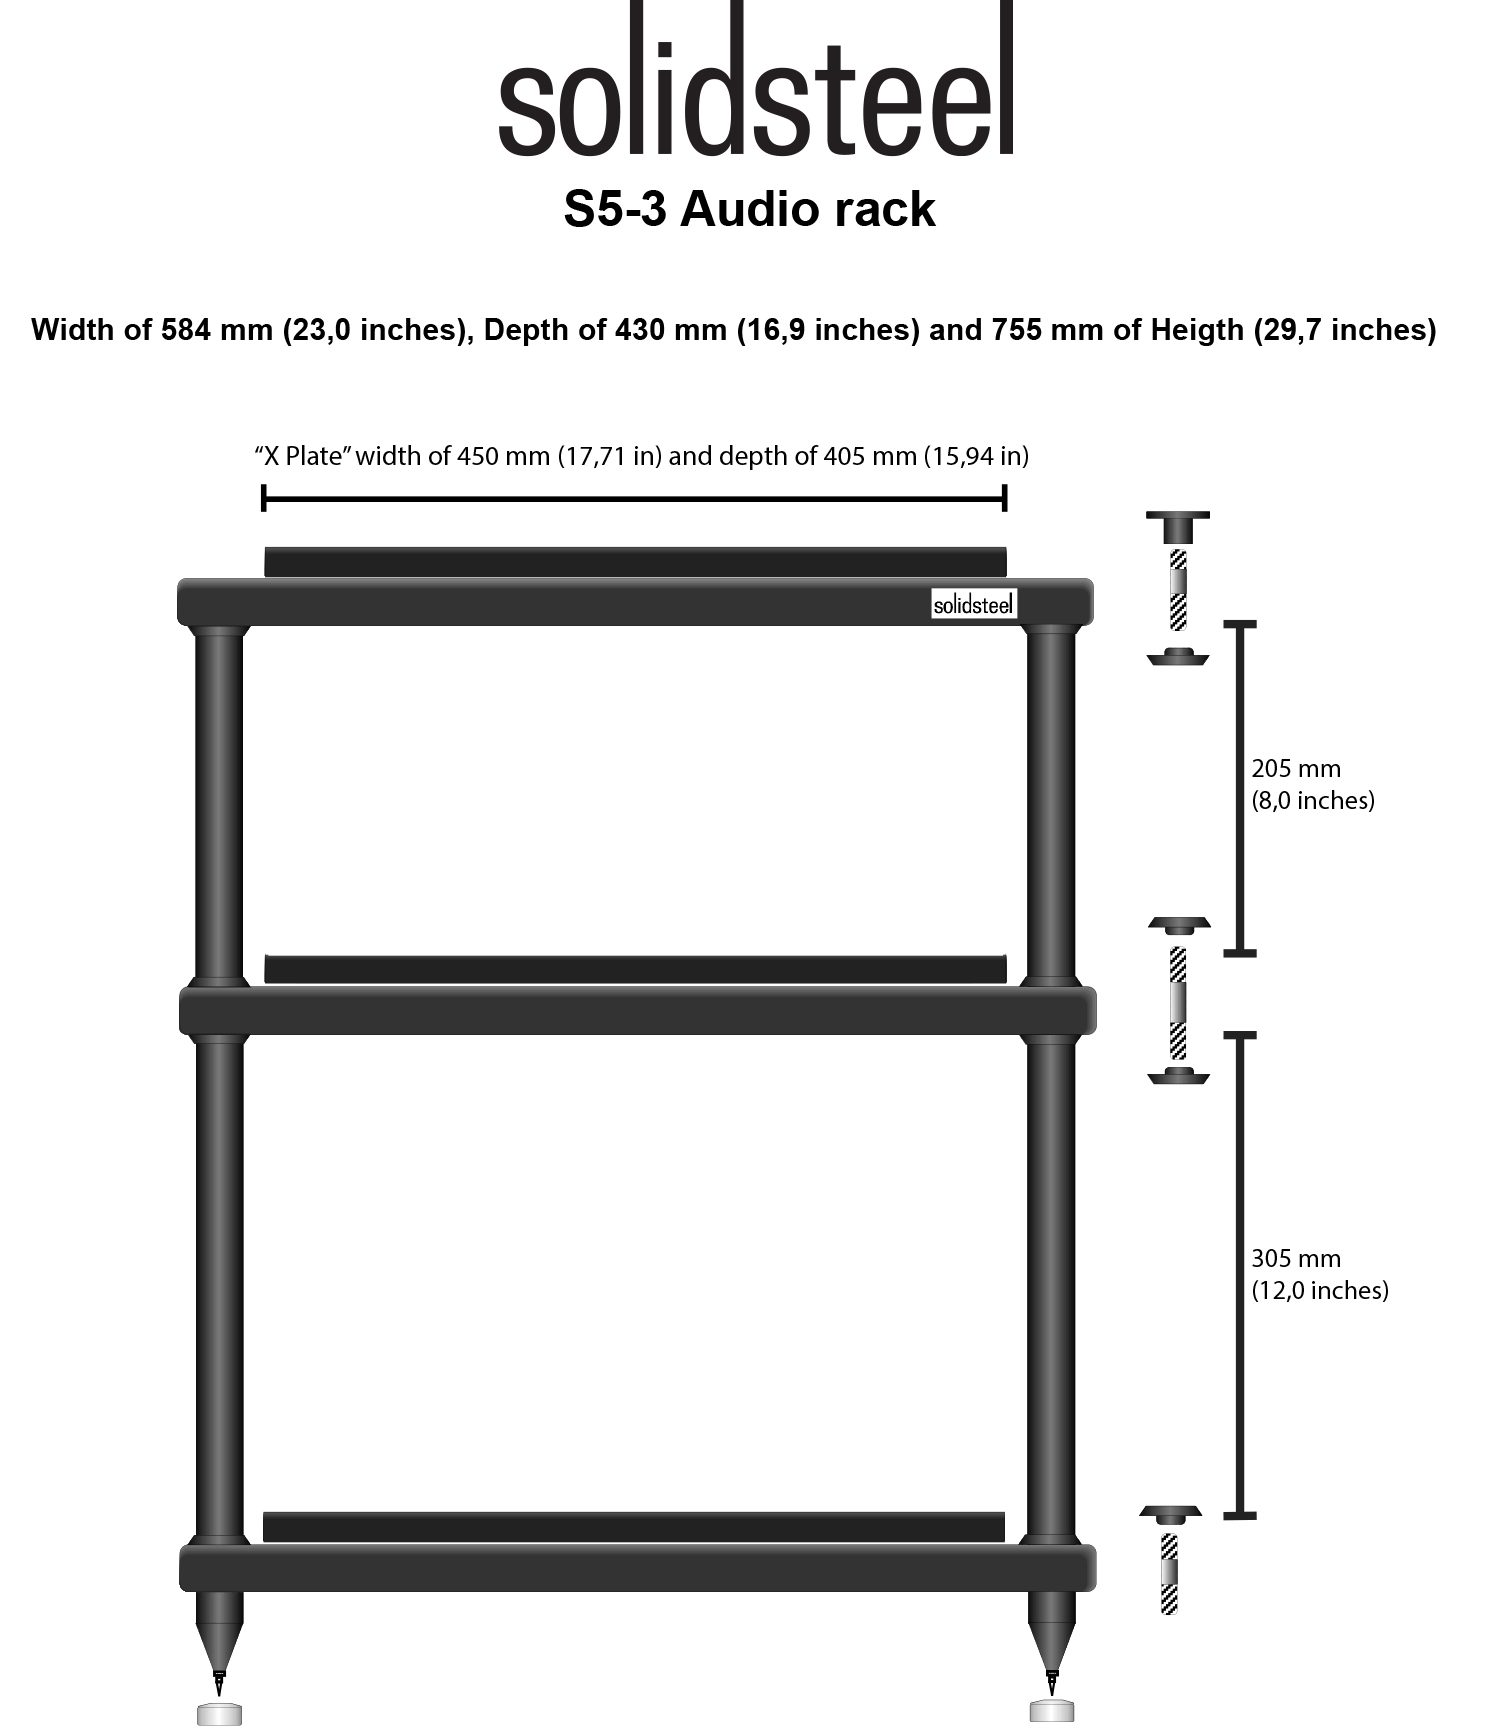  Solidsteel S5-3 dimension taille rack